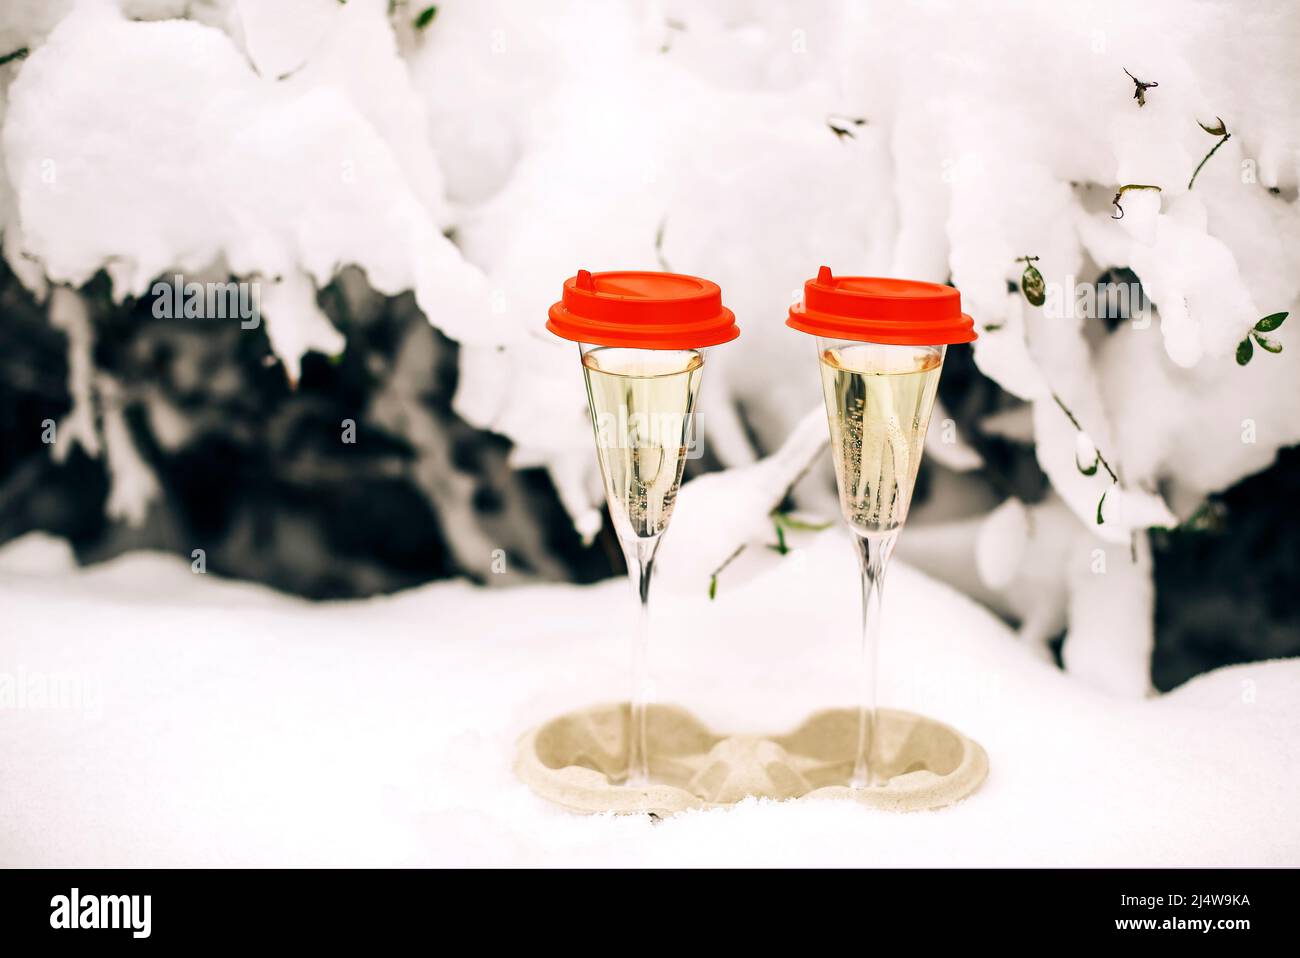 Happy New Year. Two glasses of champagne with red cups standing in snowy courtyard of apartment building. Winter holidays concept Stock Photo